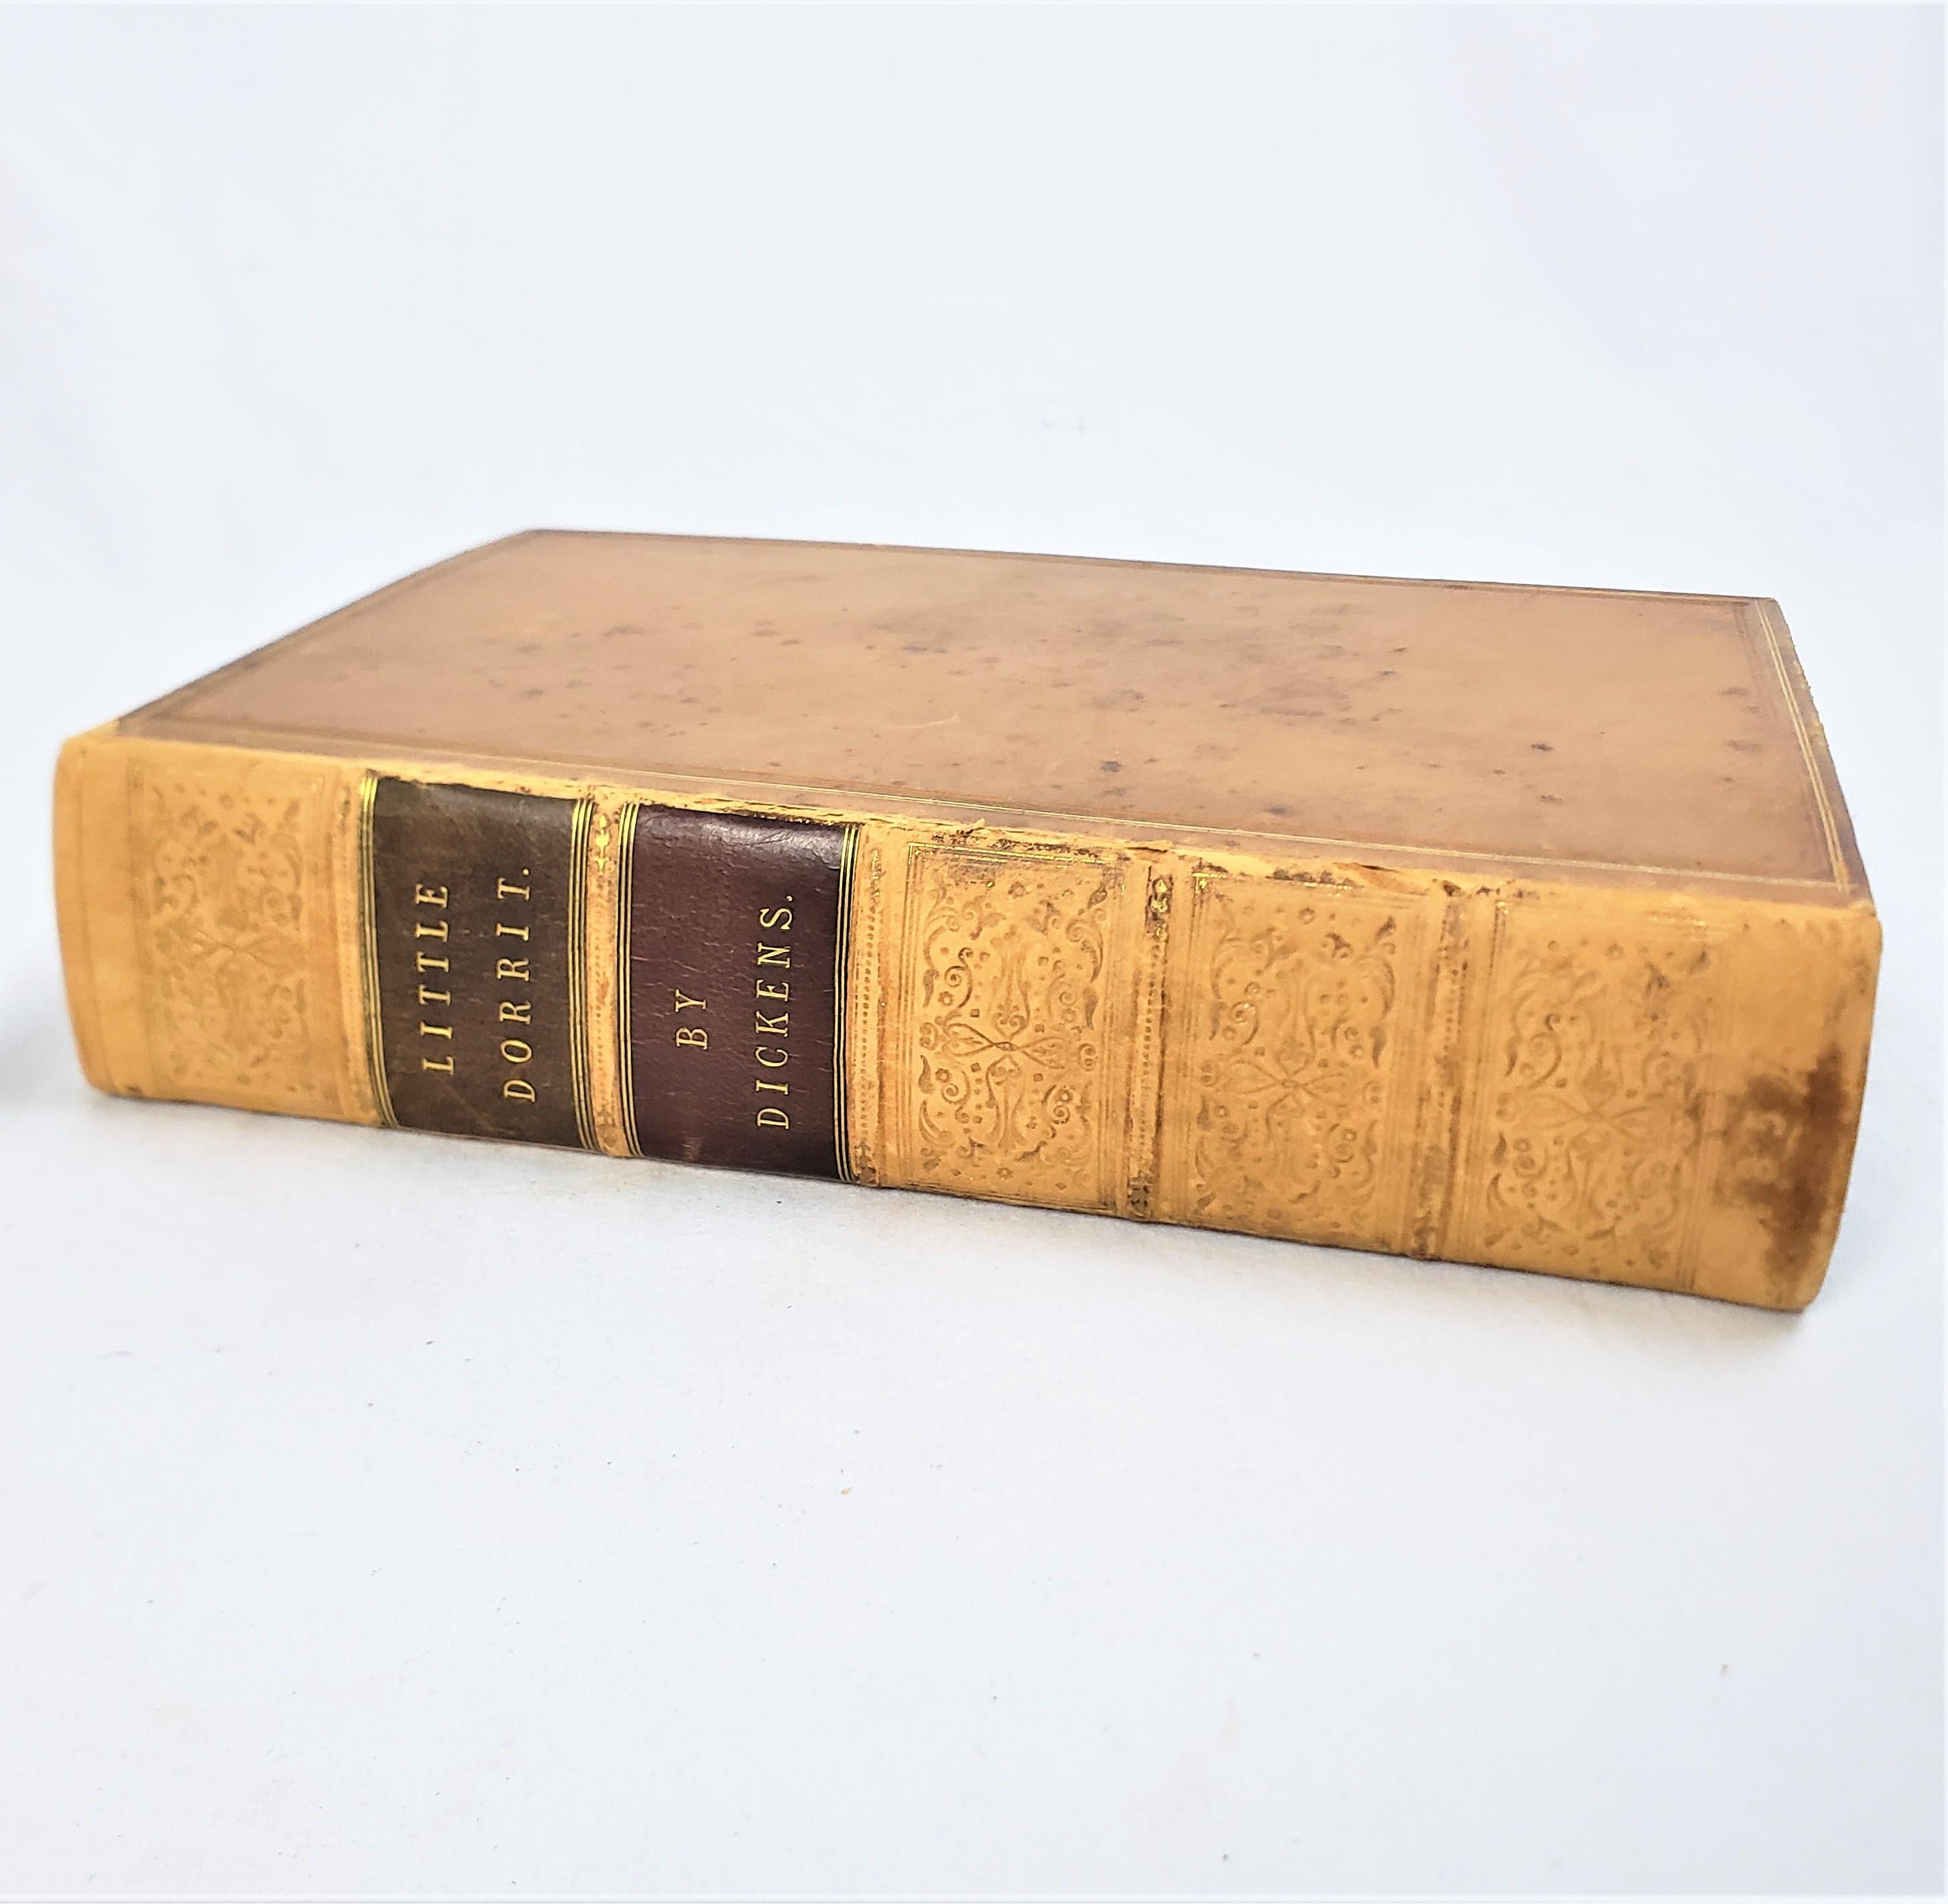 This antique 1st edition book titled Little Dorrit was authored by Charles Dickens and published by Chapman and Hall of England in 1857 in the period Victorian style with etchings by Hablot Knight Browne 